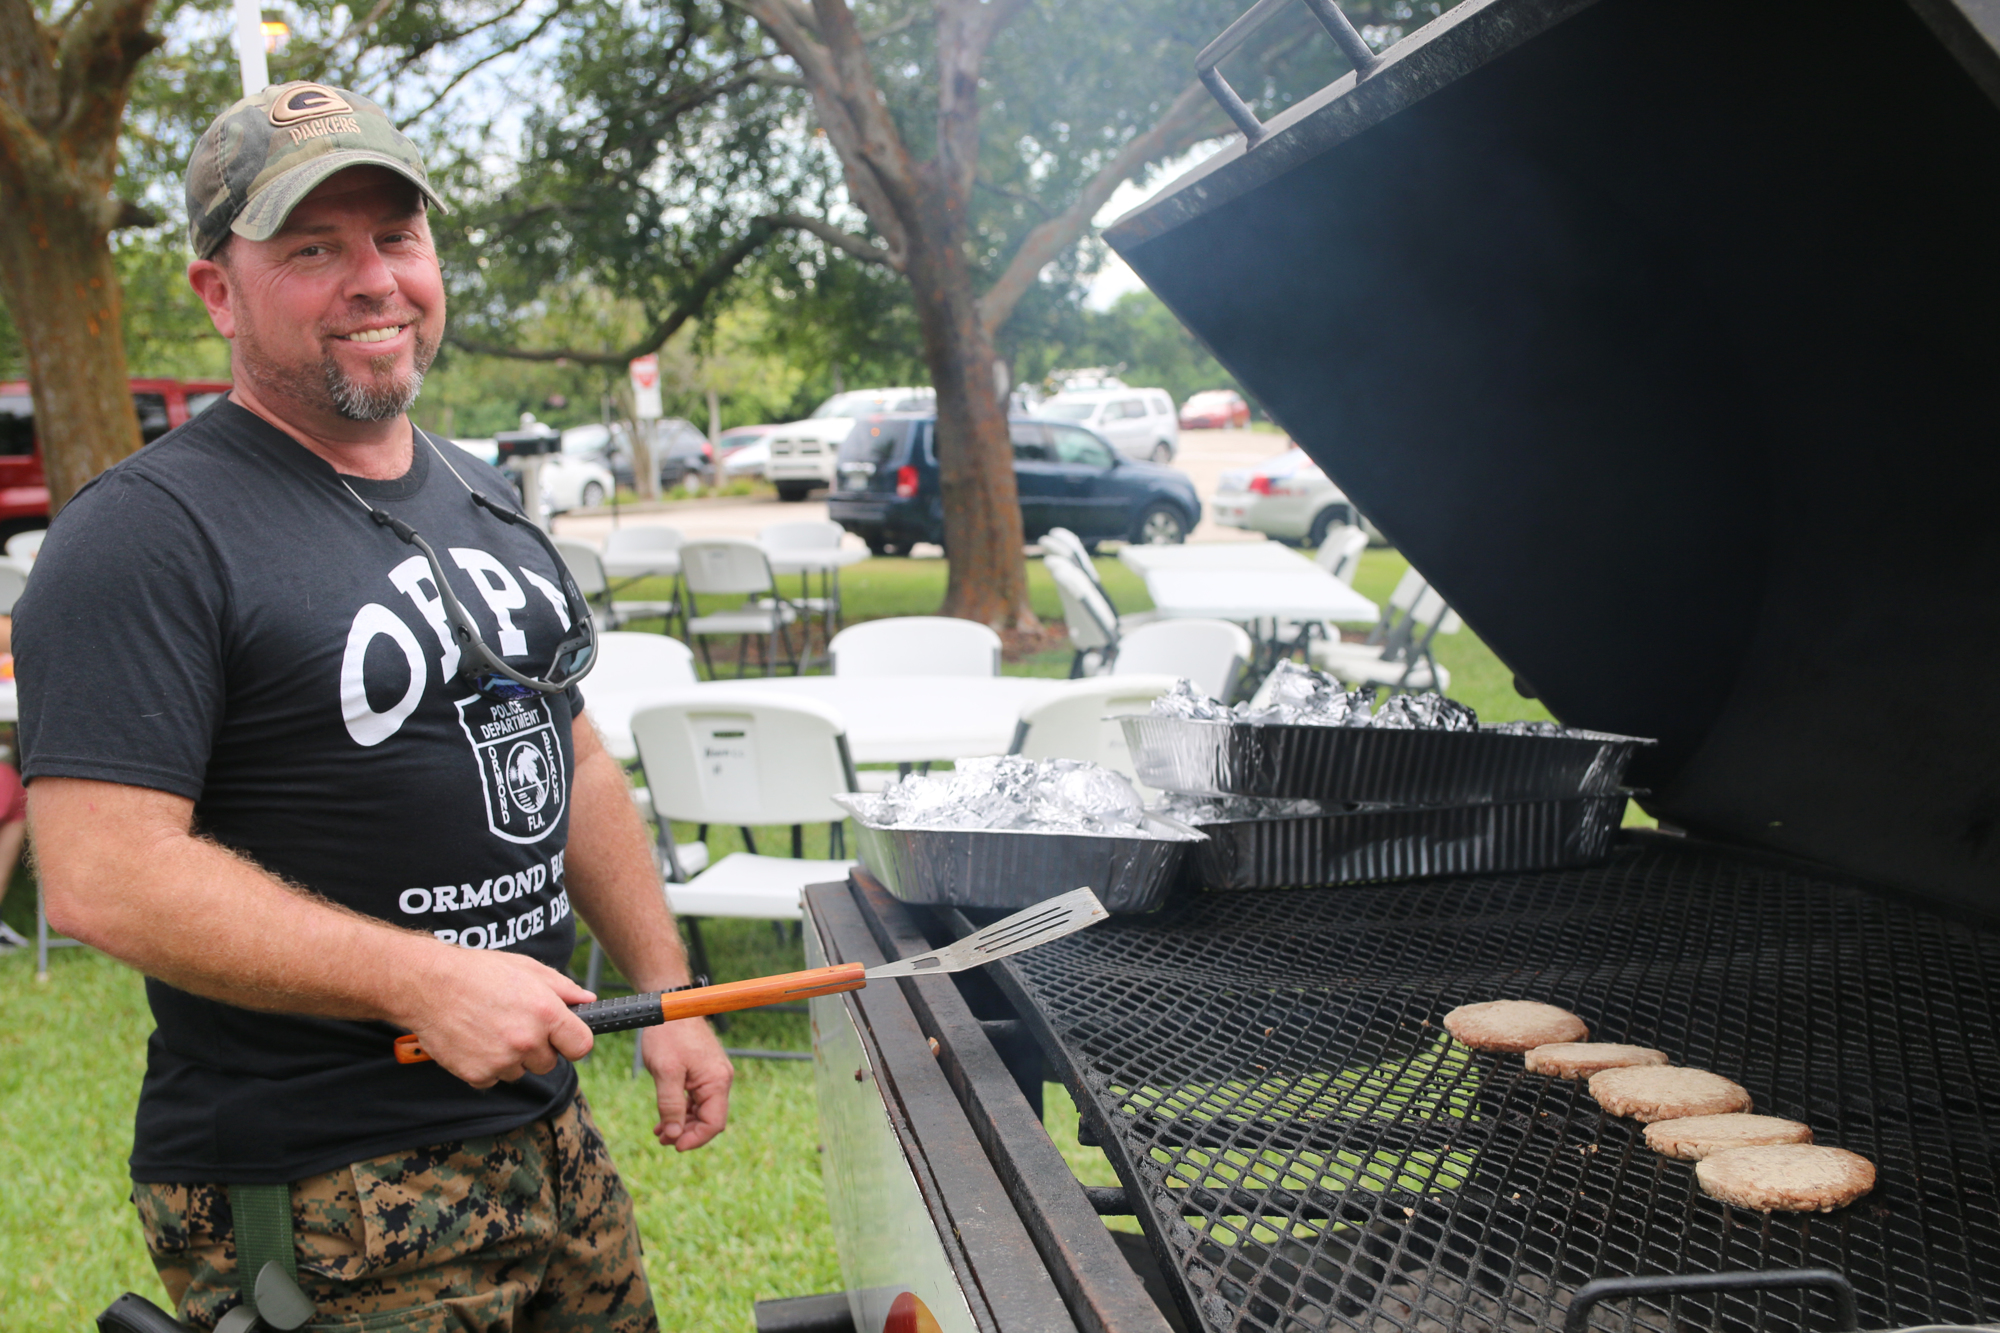 Capt. D.W. Smith grills some burger patties during the annual National Night Out event on Tuesday, Aug. 6. Photo by Jarleene Almenas